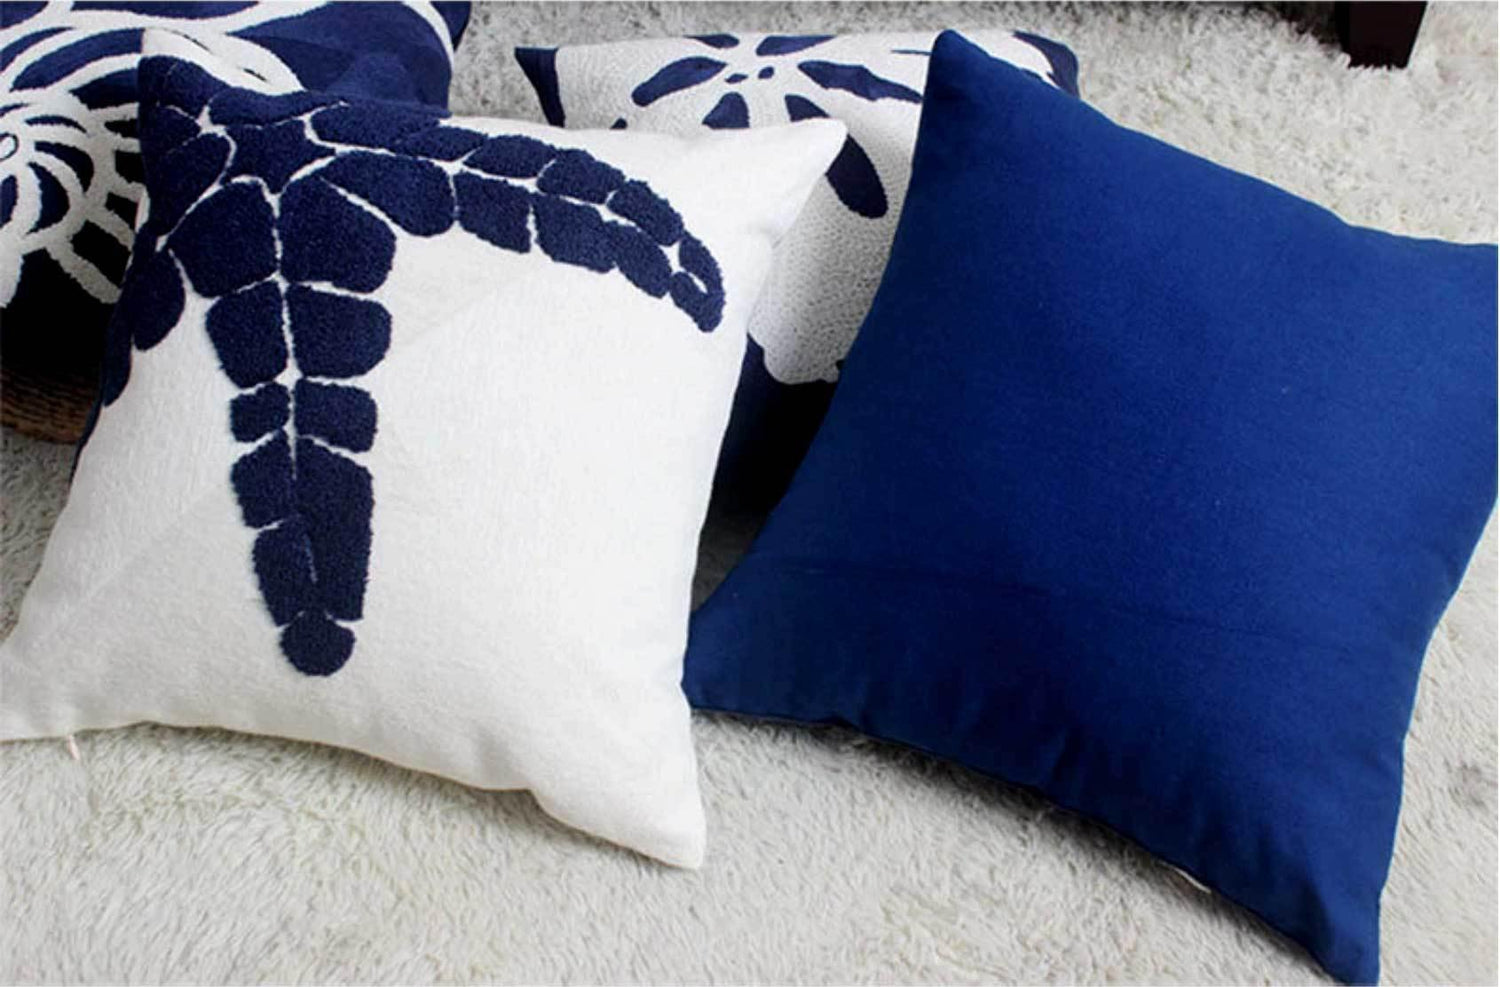 Embroidered Marine Cushions - Nordic Side - 